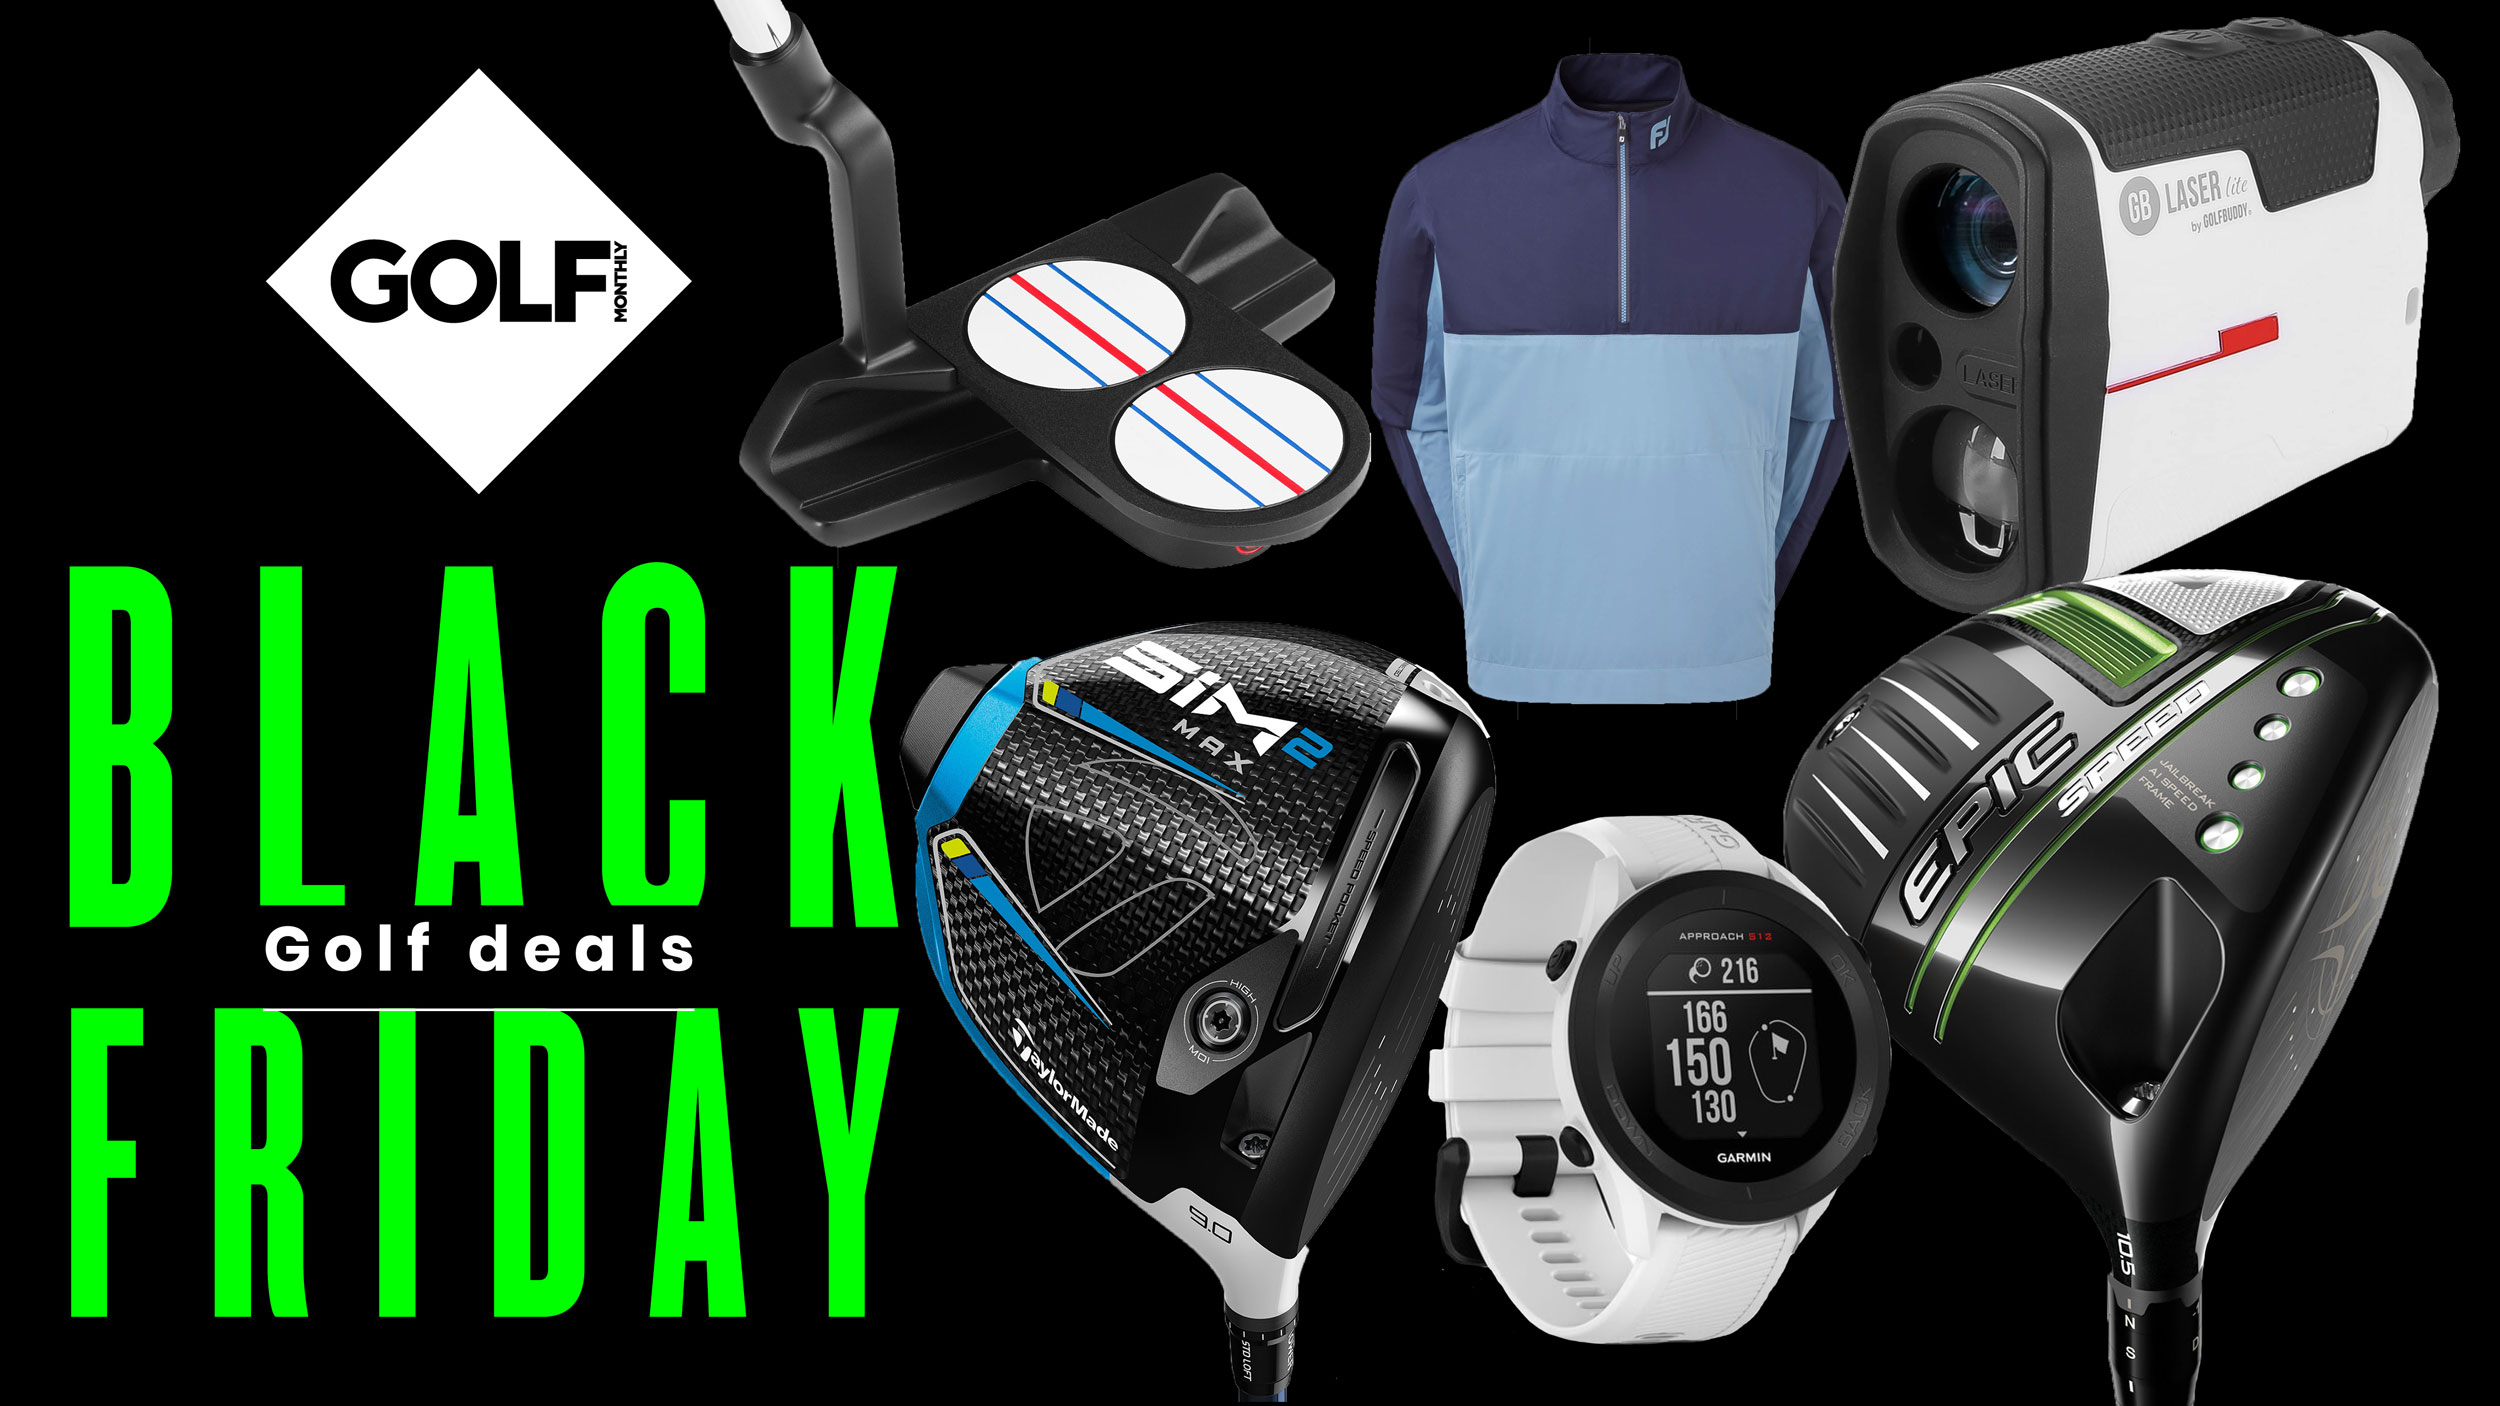 TGWcom  The Golf Warehouse Black Friday Deals Continue  700 Unreal  Price Drops  Milled